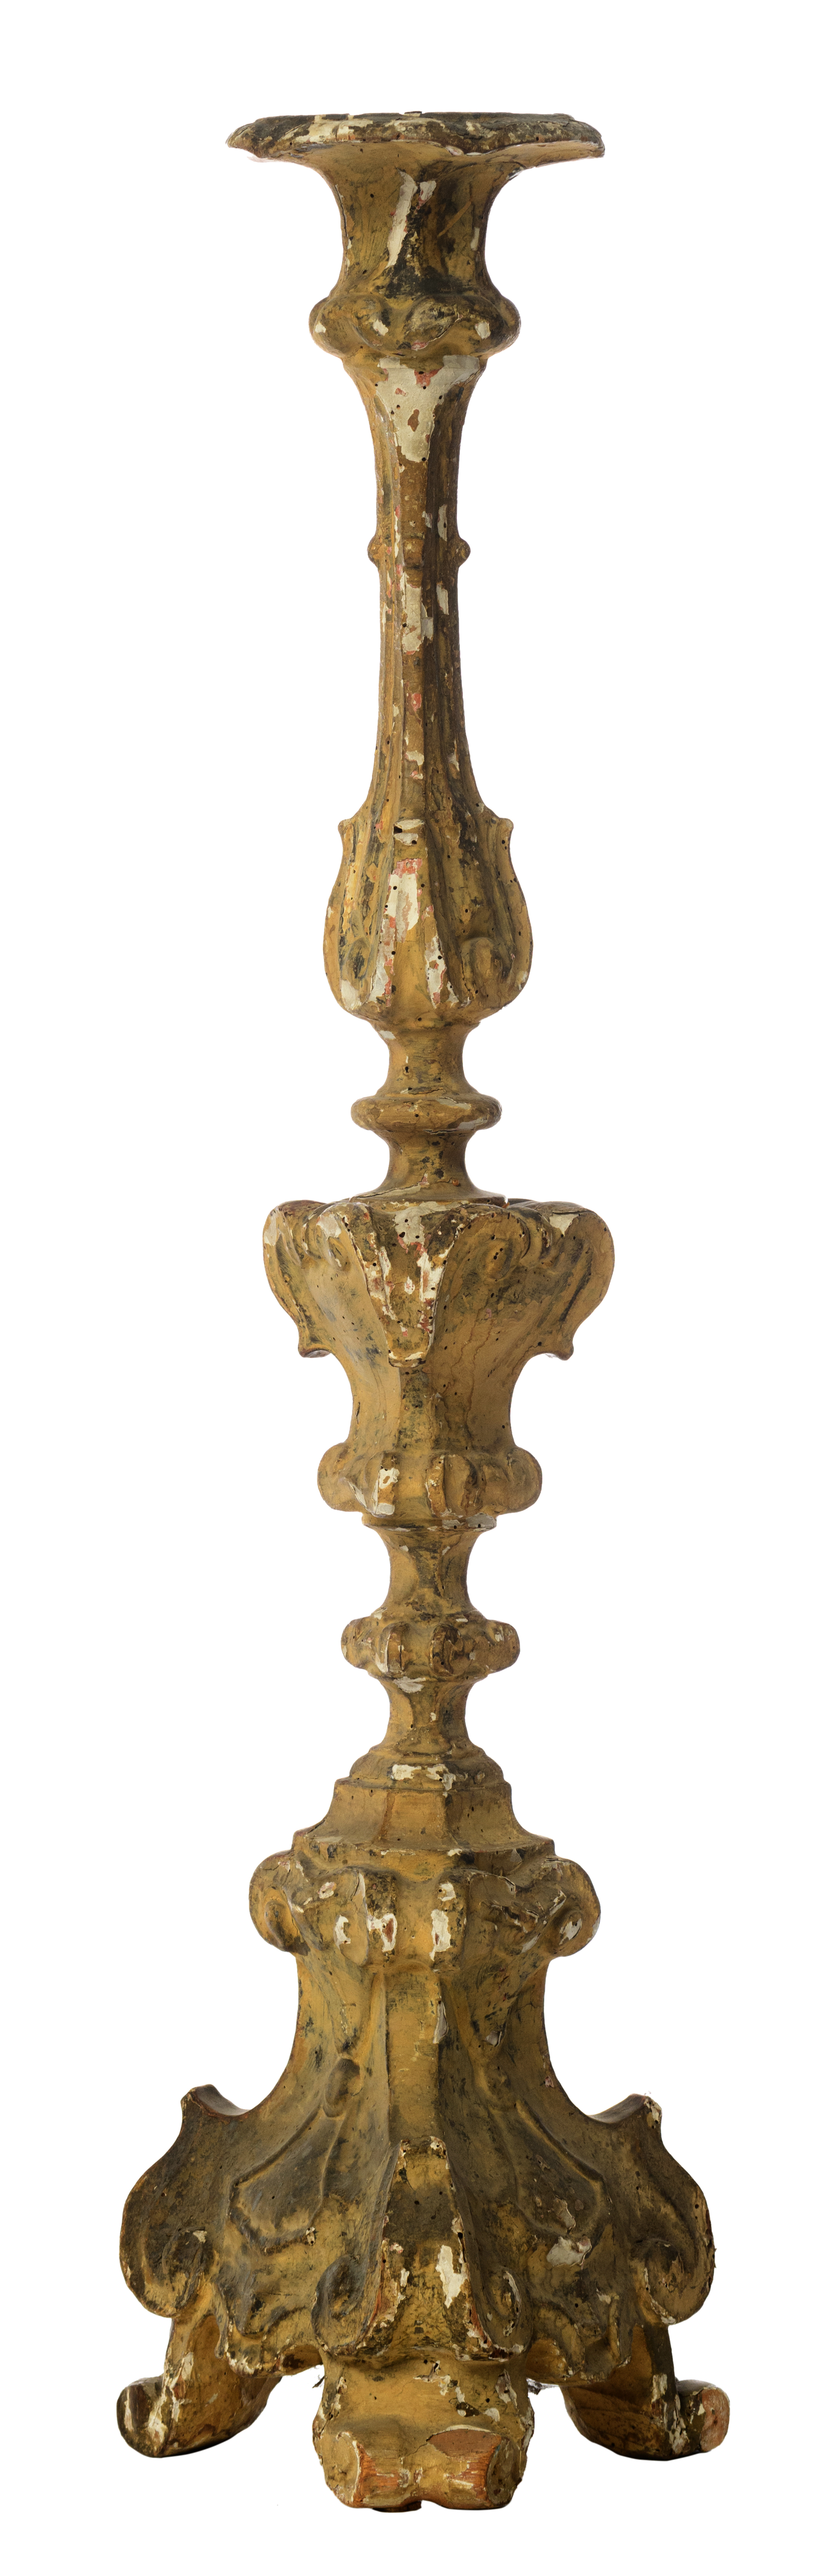 A large gilded wood Baroque altar candlestick, 18thC, H 118 cm